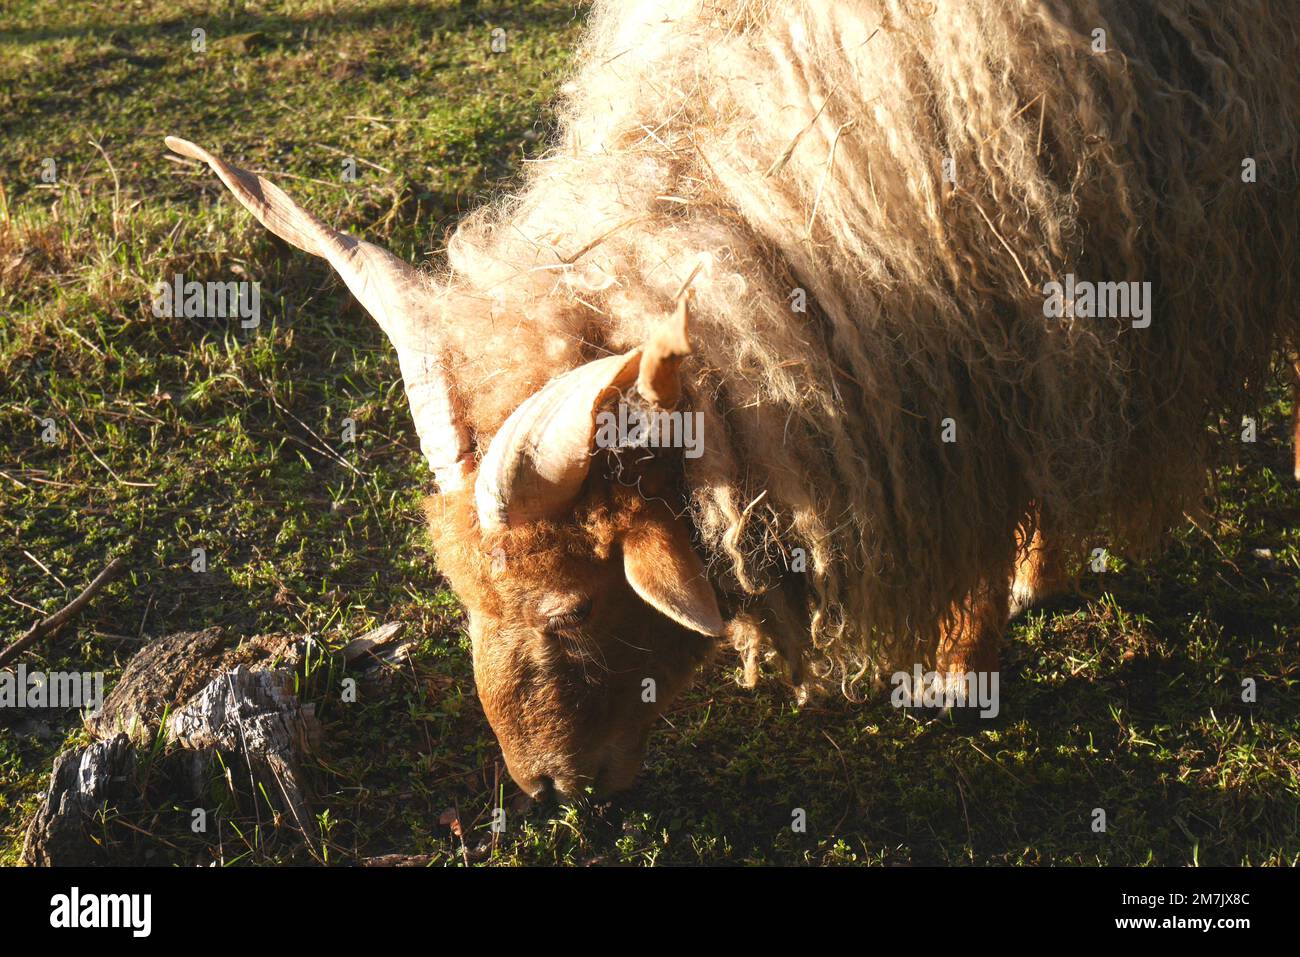 A Hungarian Hortobagy Racka sheep with distinctive spiral horns in a field, Szigethalom, Hungary Stock Photo